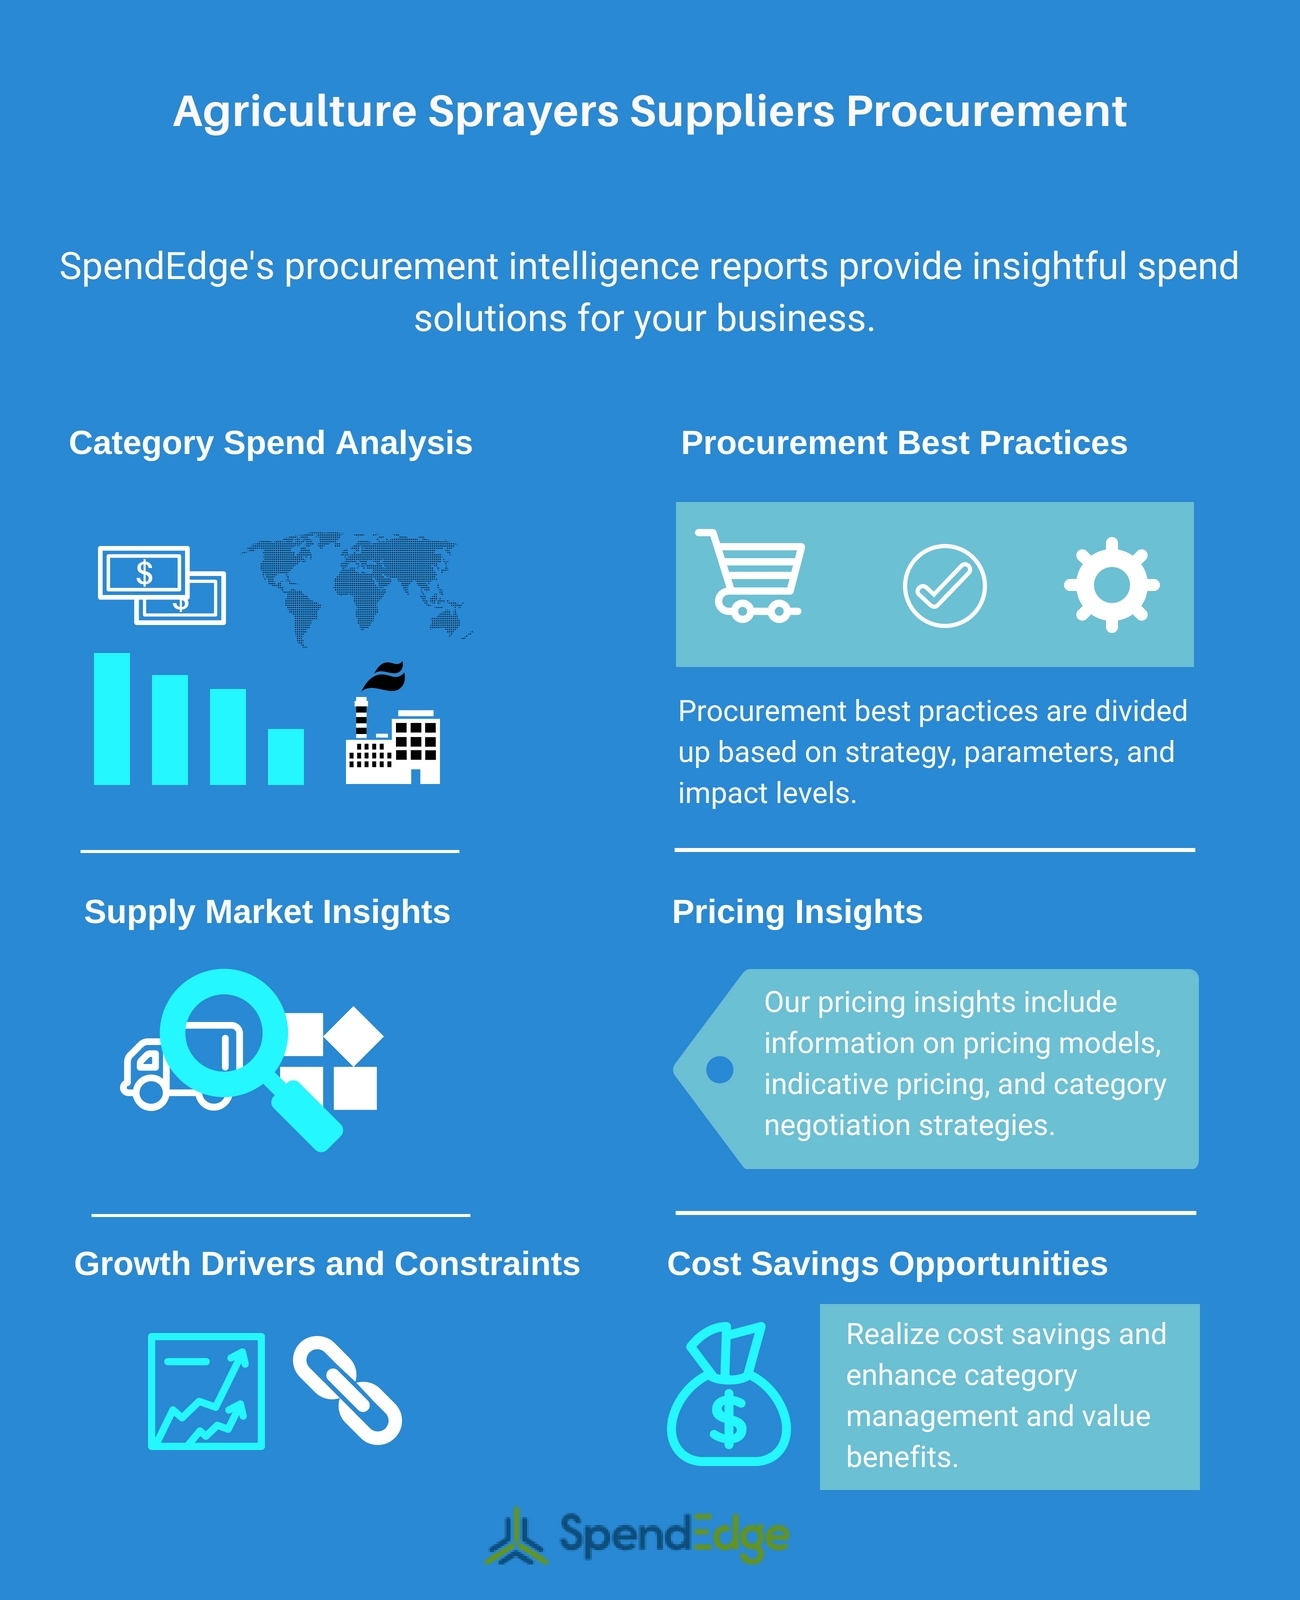 Agriculture Sprayers Suppliers Procurement Report Strategic Sourcing And Category Management Metrics Insights Now Available From Spendedge Business Wire